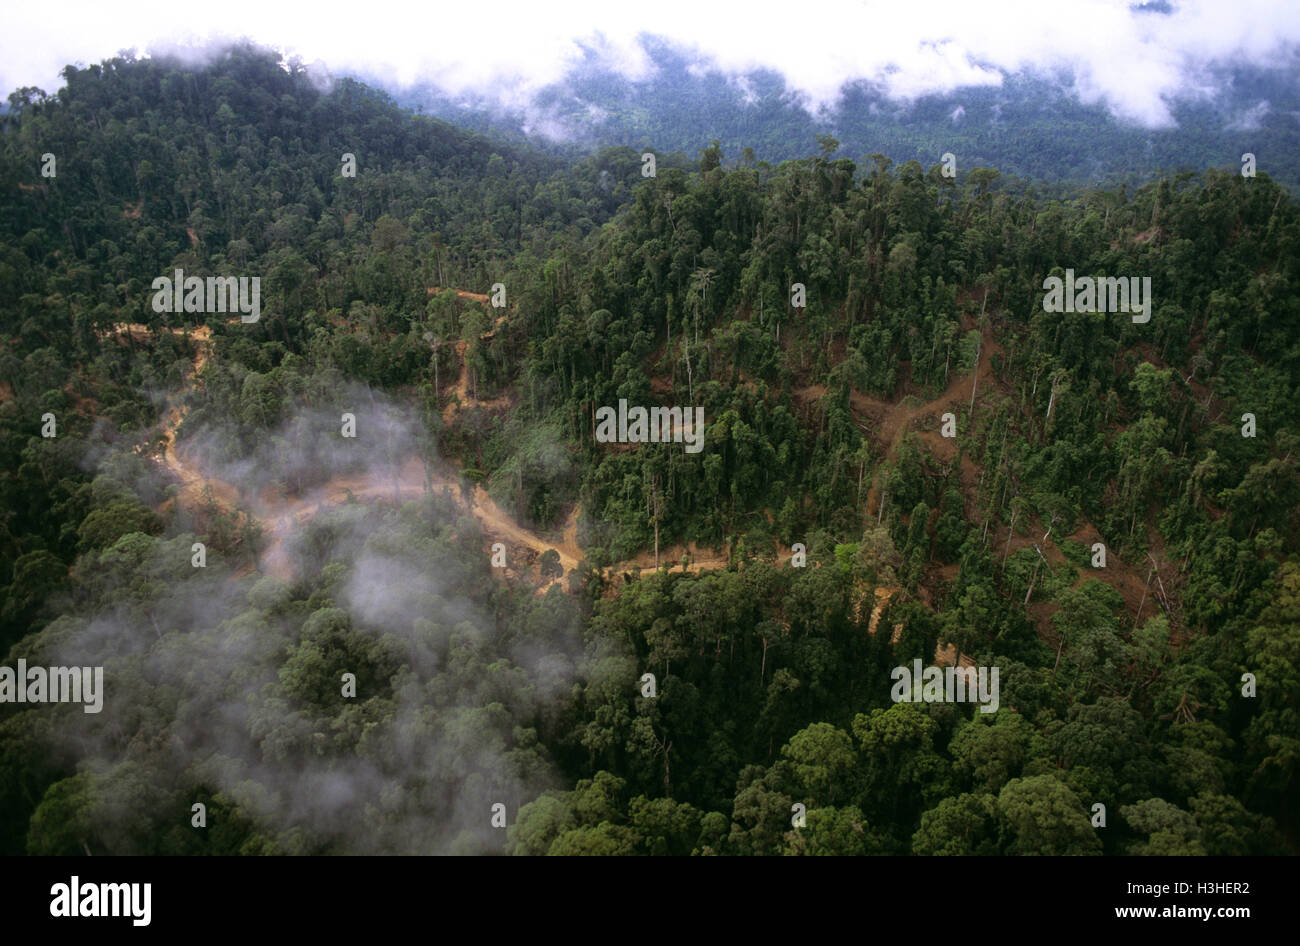 Lowland tropical rainforest with logging access roads, skid trails and log landings visible, Stock Photo